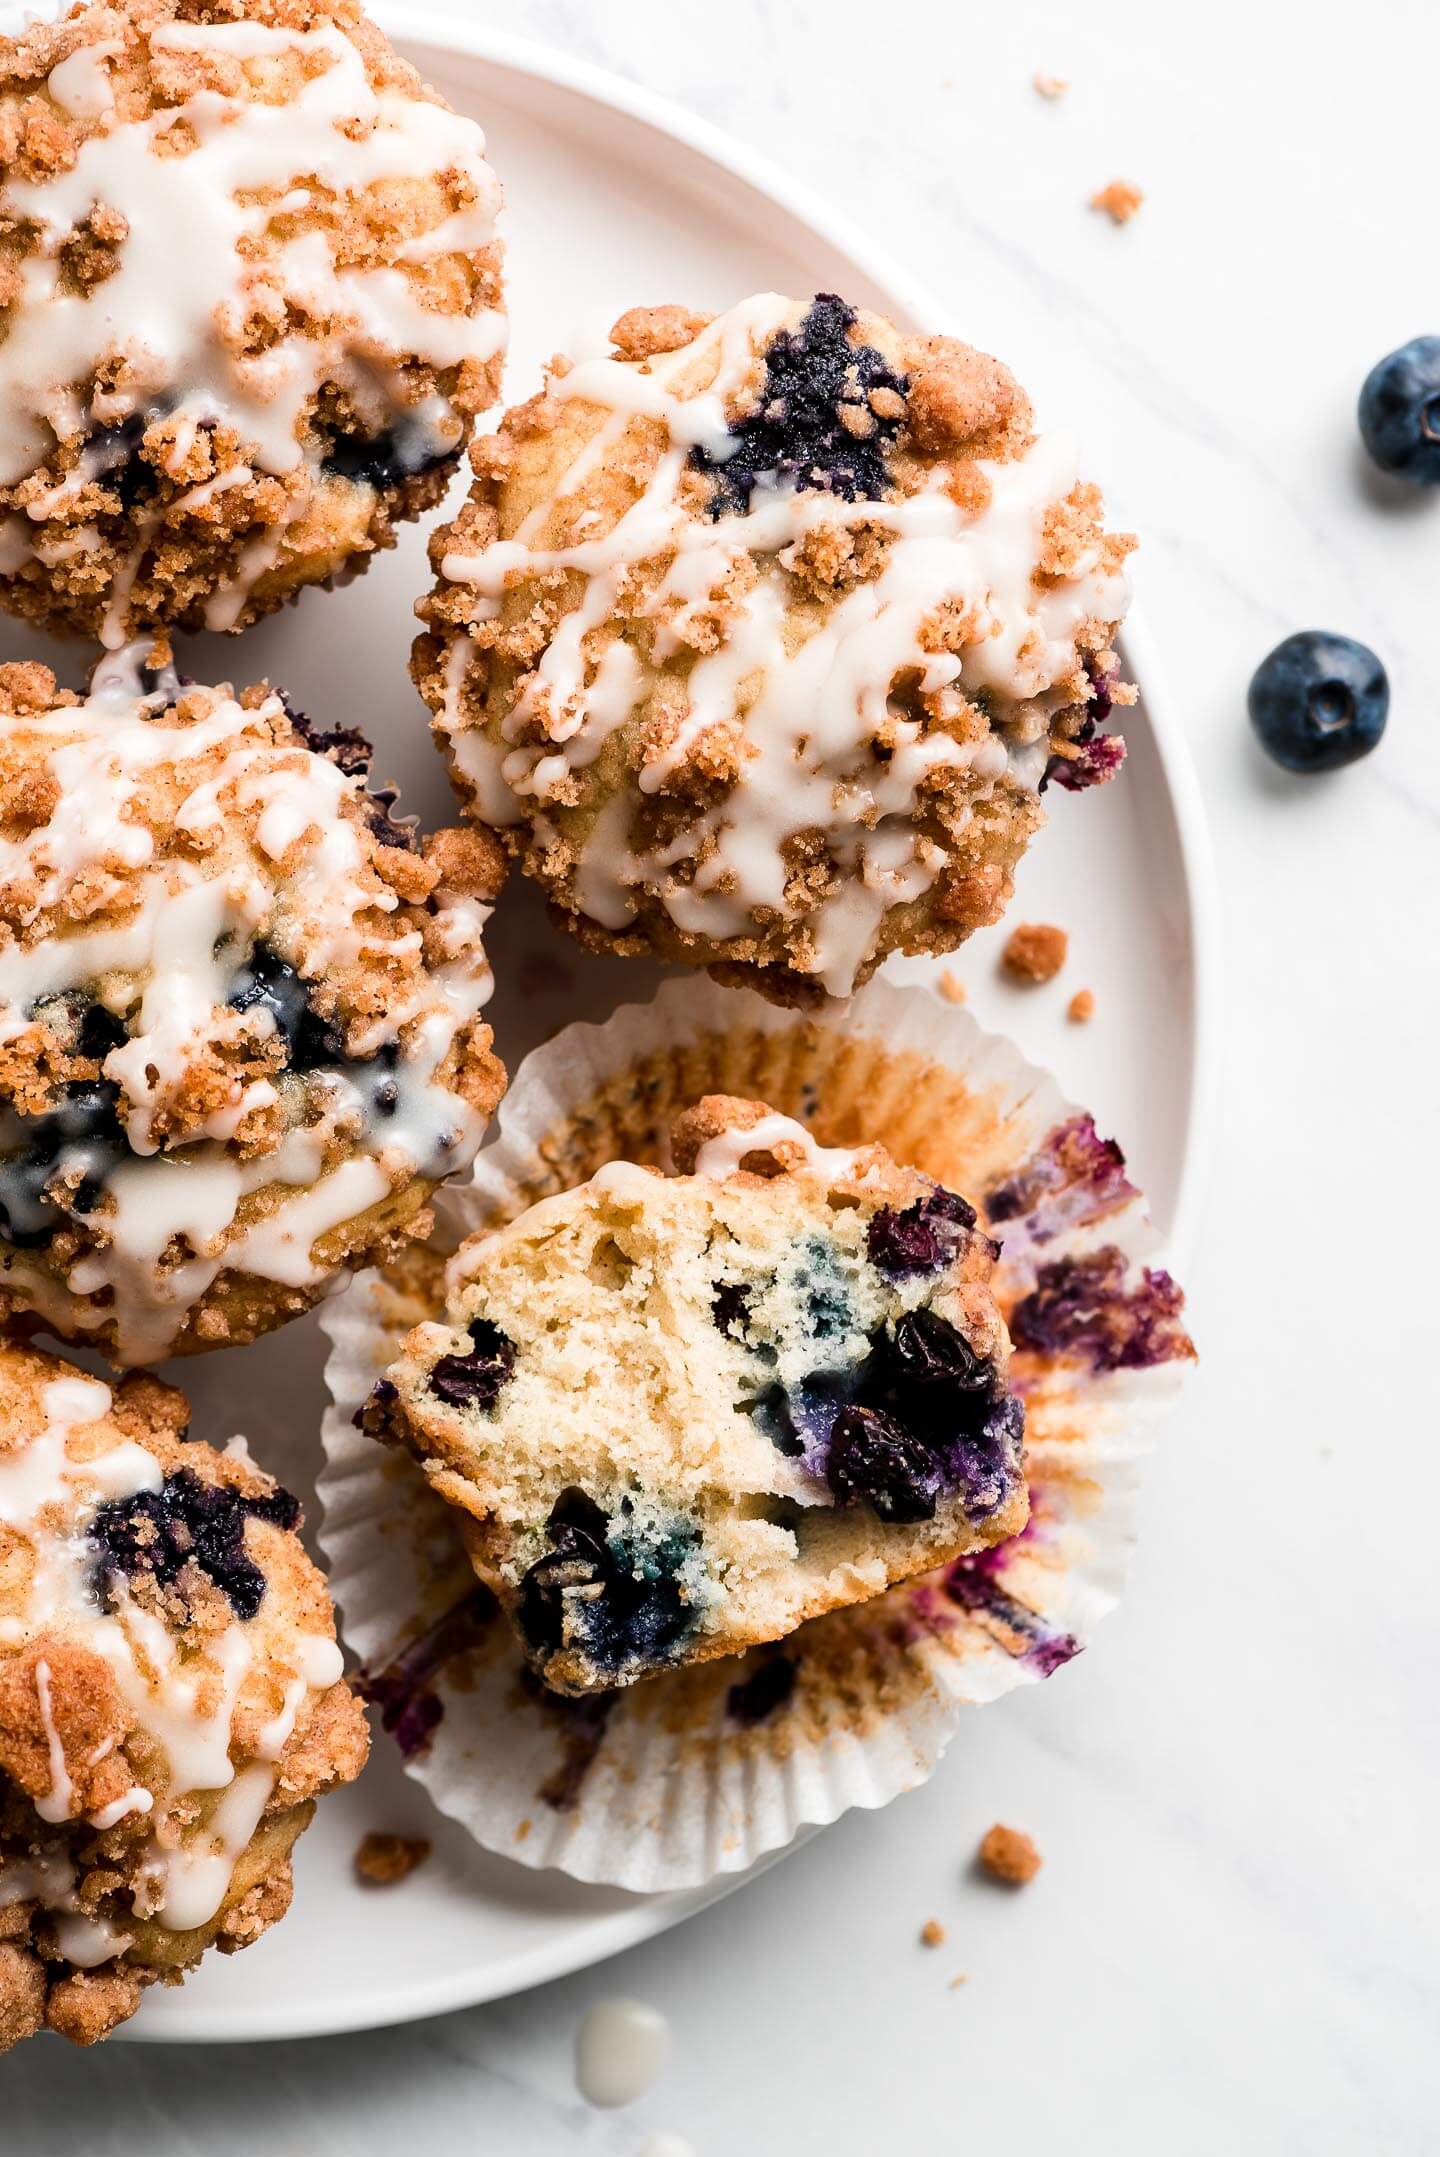 Streusel and icing topped blueberry muffins with one cut in half showing the fluffy tender crumb.